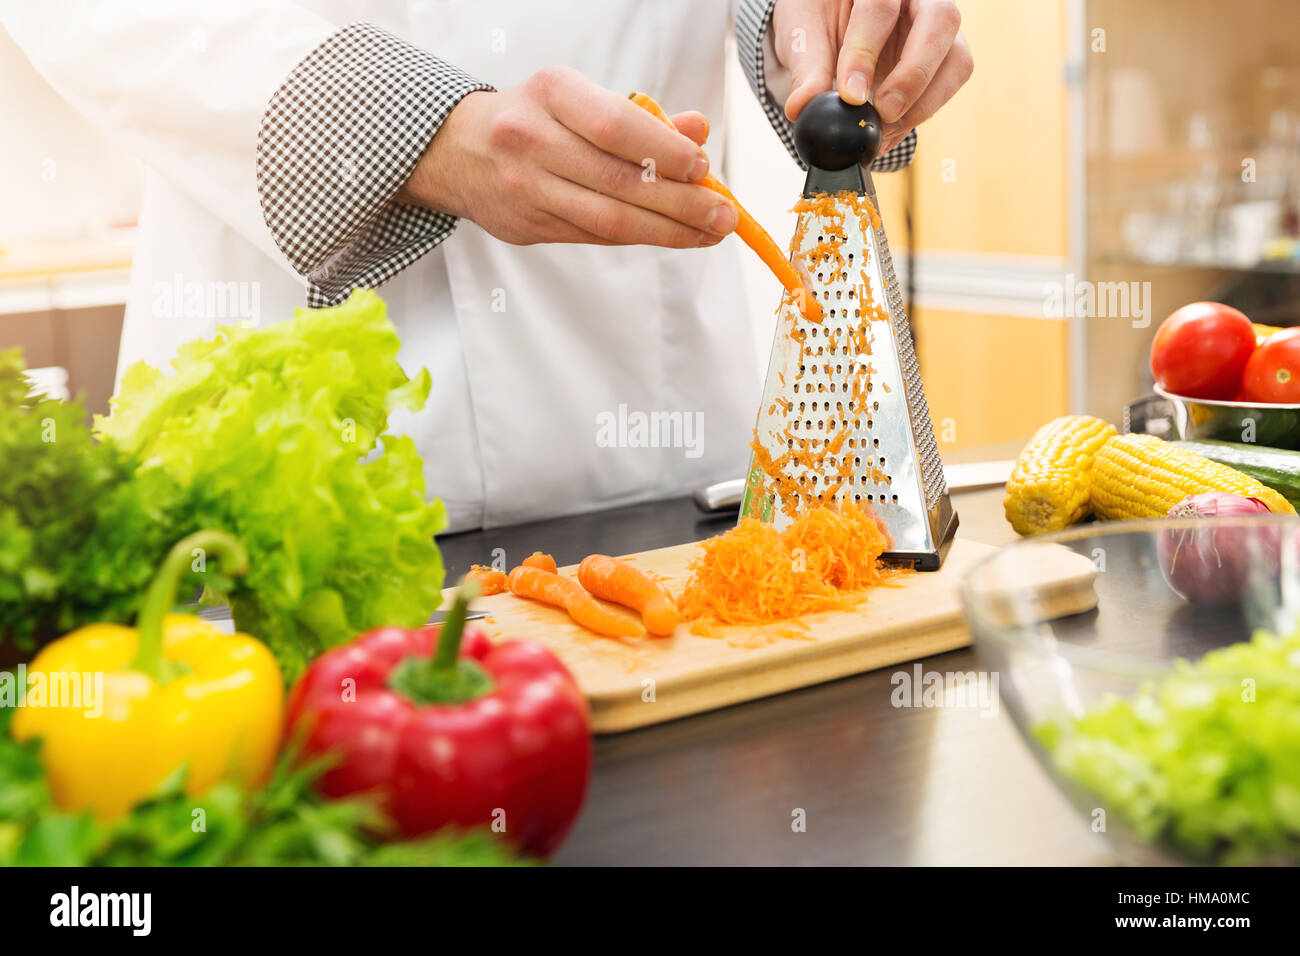 chef shredding carrots with grater in kitchen Stock Photo